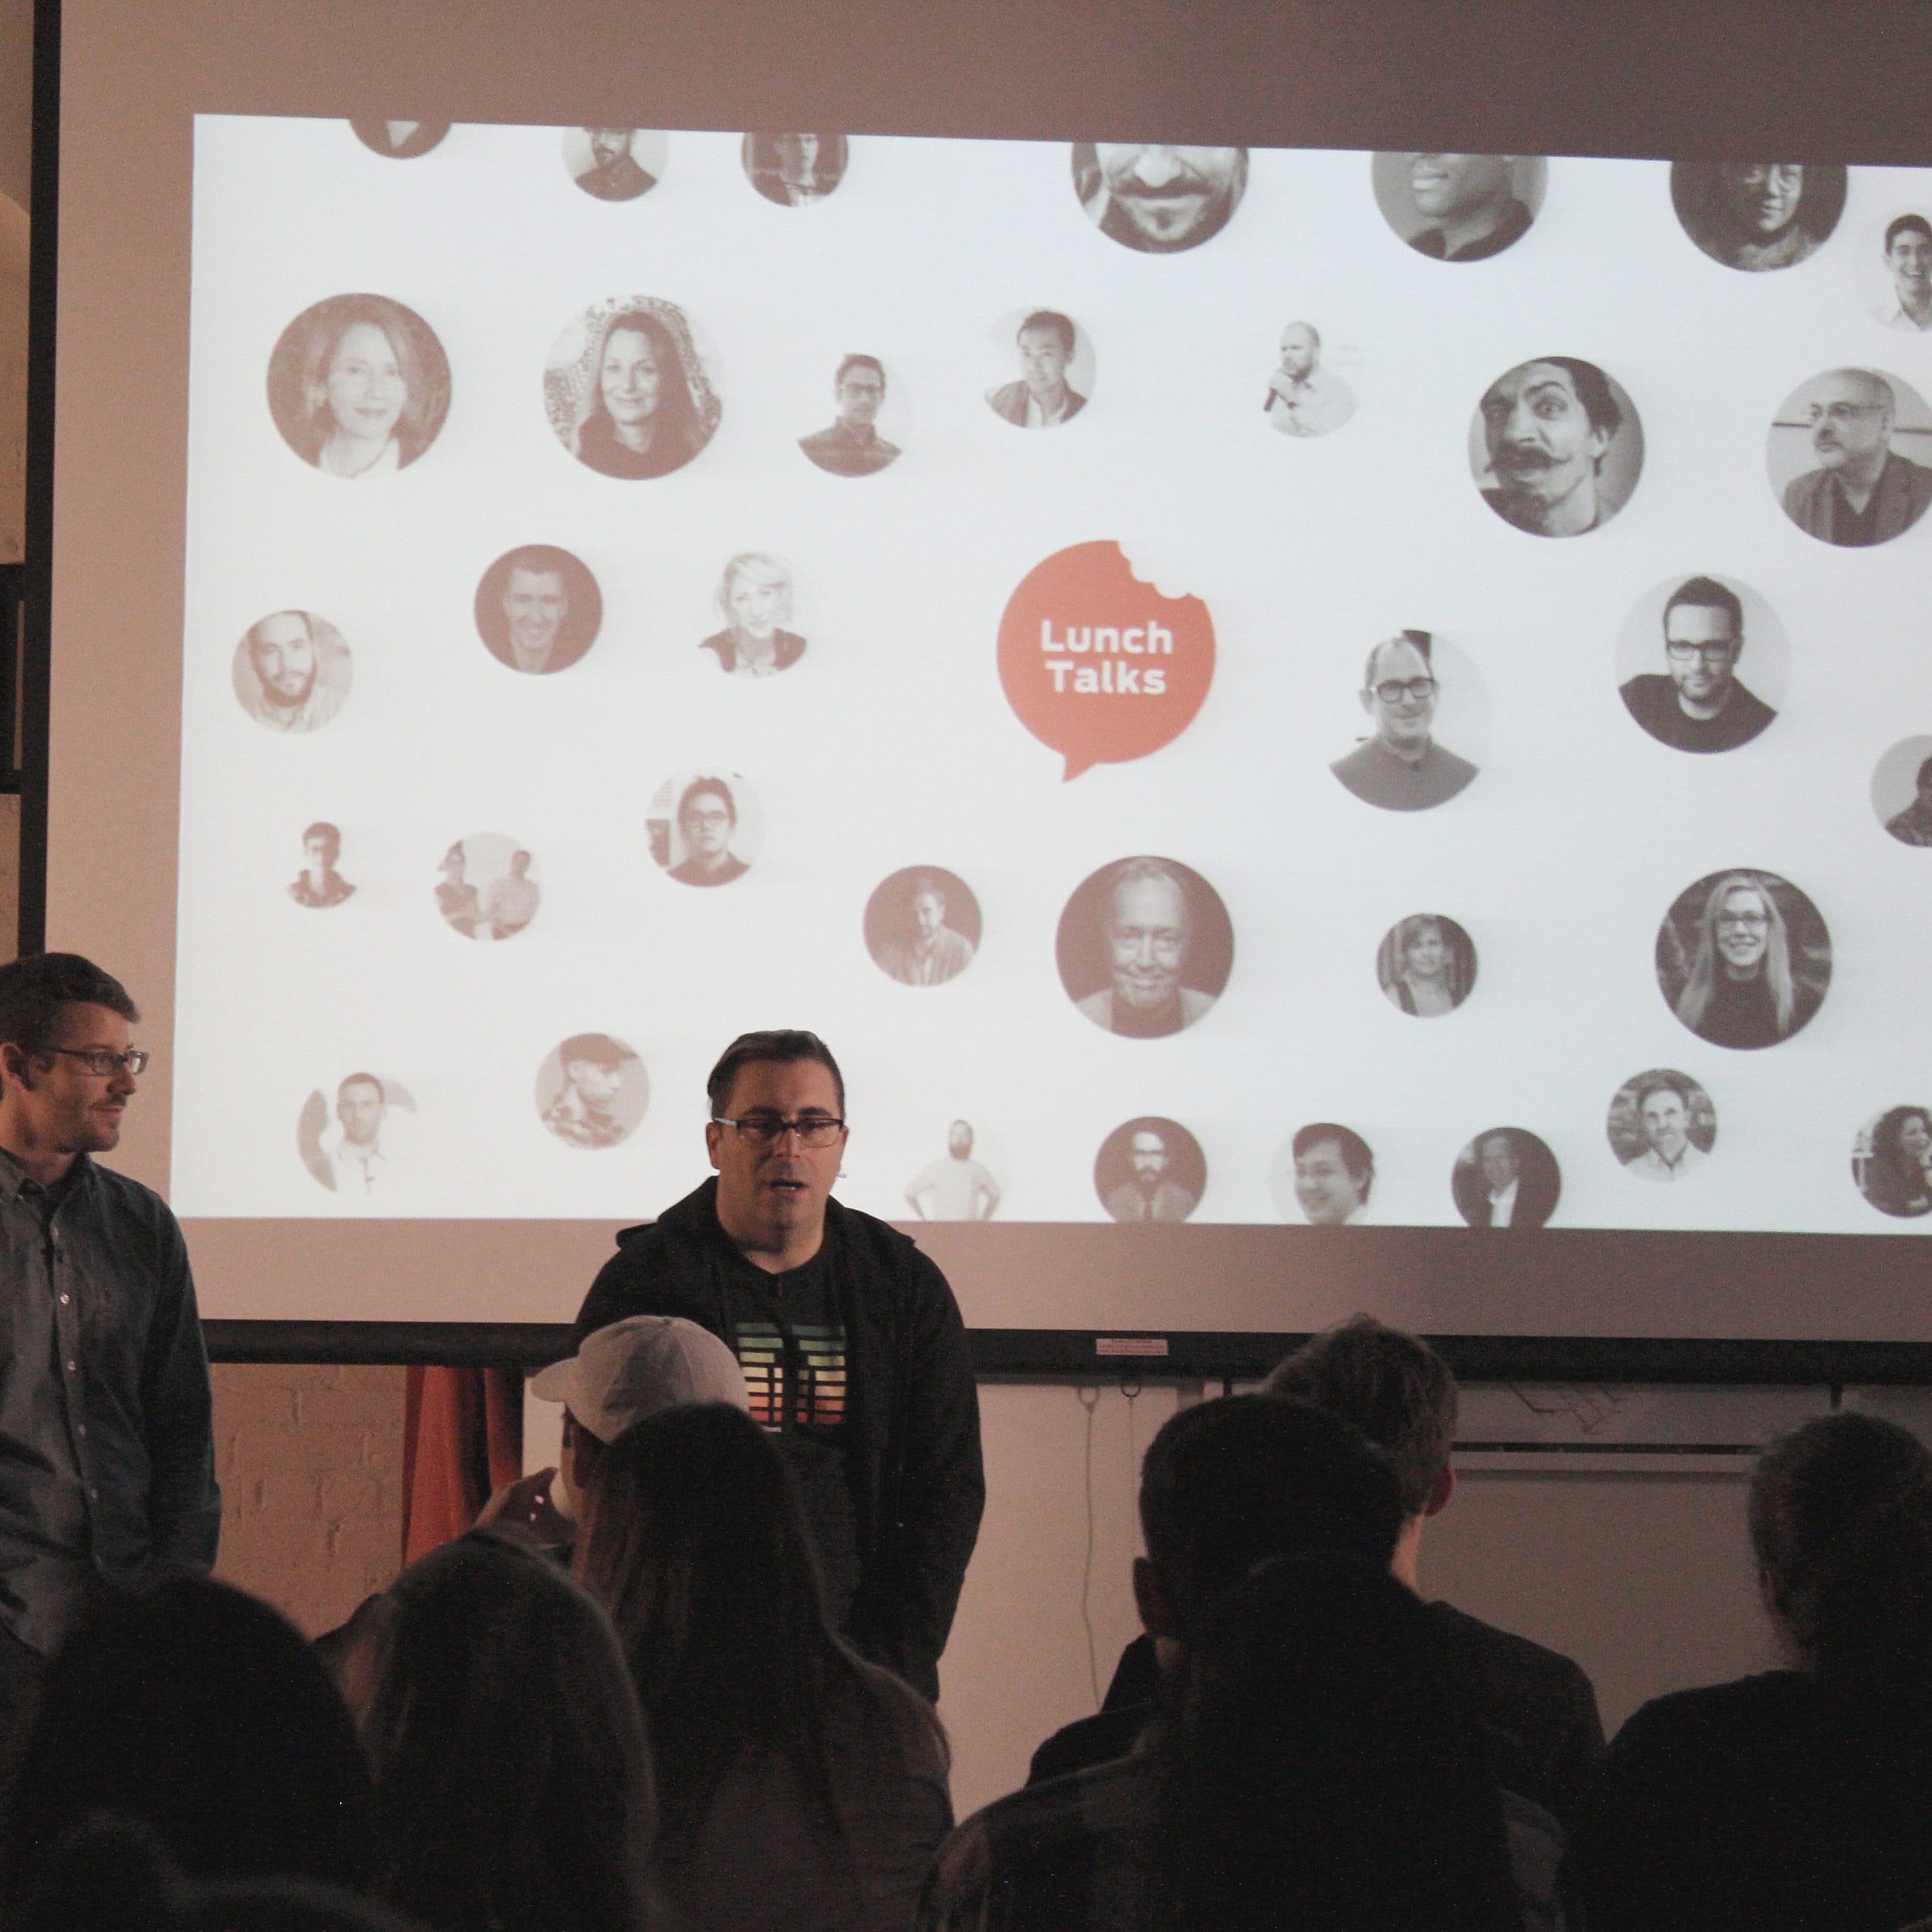 Two presenters stand in front of a projector screen displaying a collage of black-and-white headshots and a red speech bubble with the text "Lunch Talks." An audience is seated facing the presenters and the screen in a dimly lit room with framed pictures on the walls.